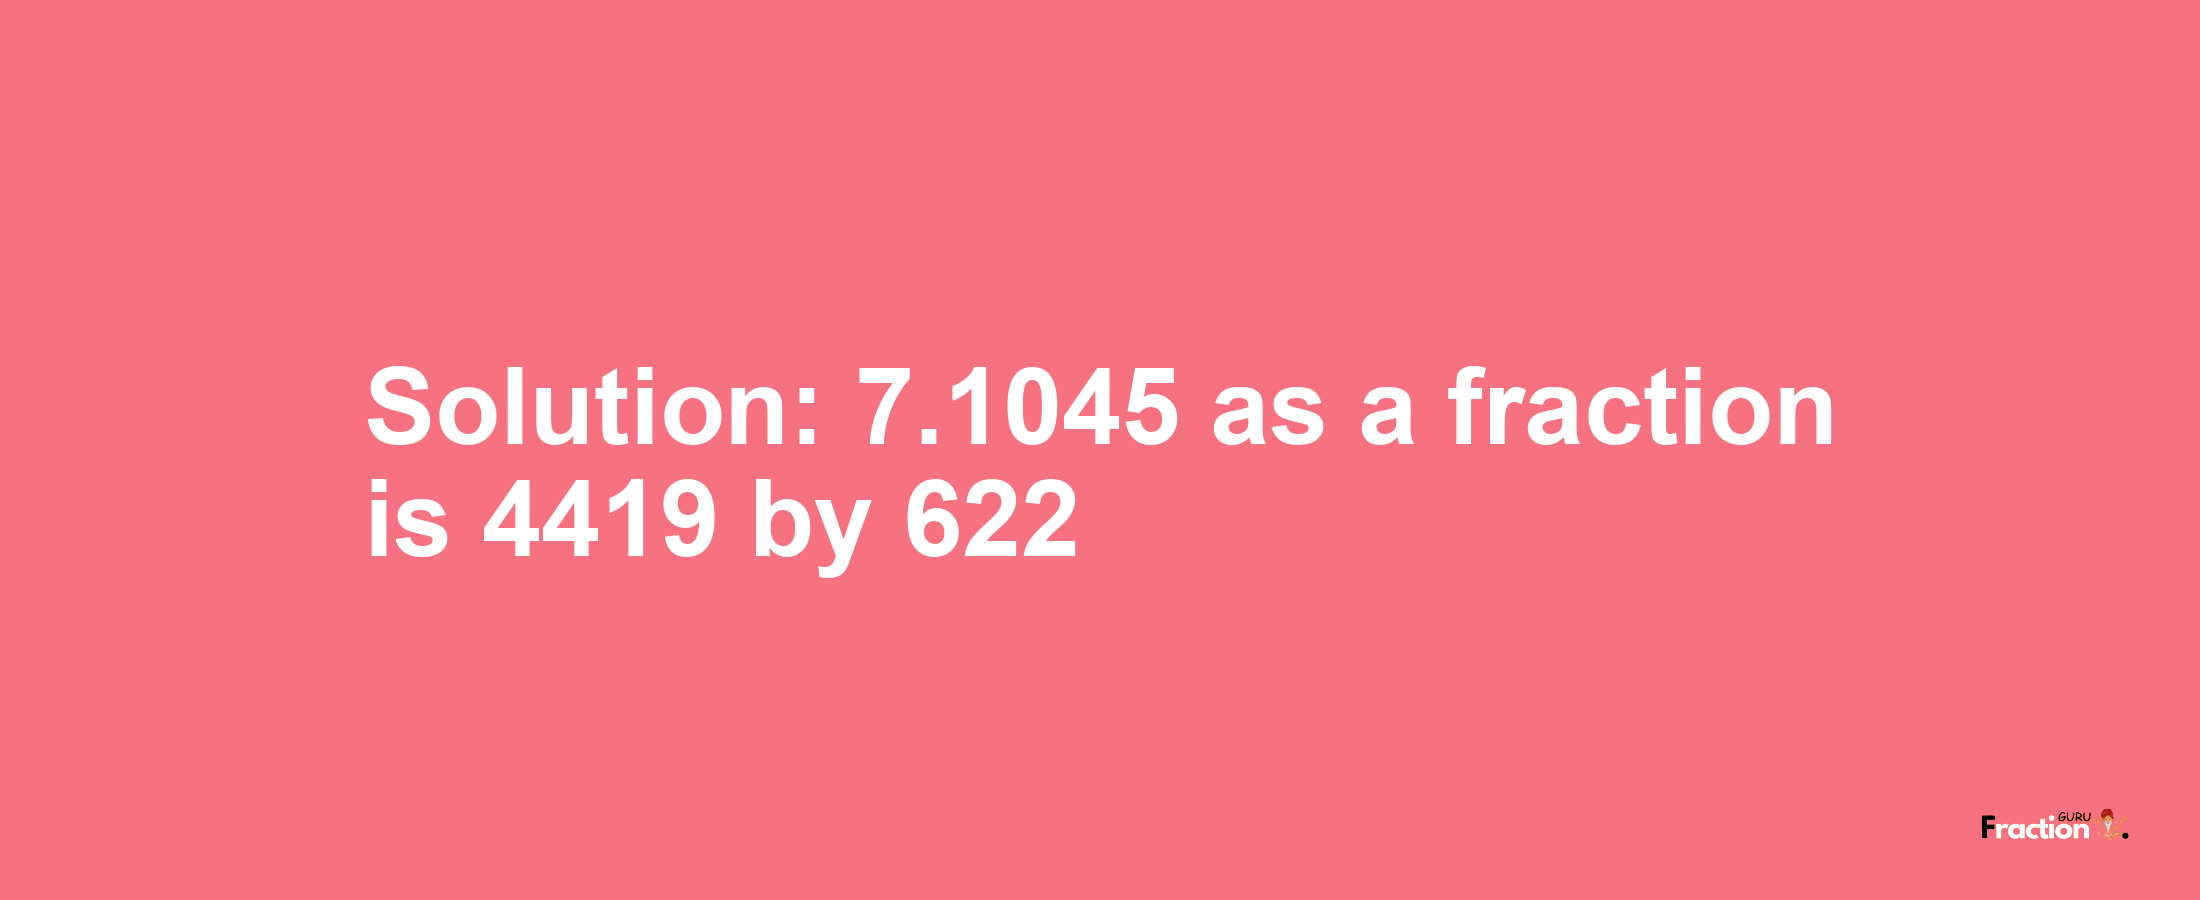 Solution:7.1045 as a fraction is 4419/622